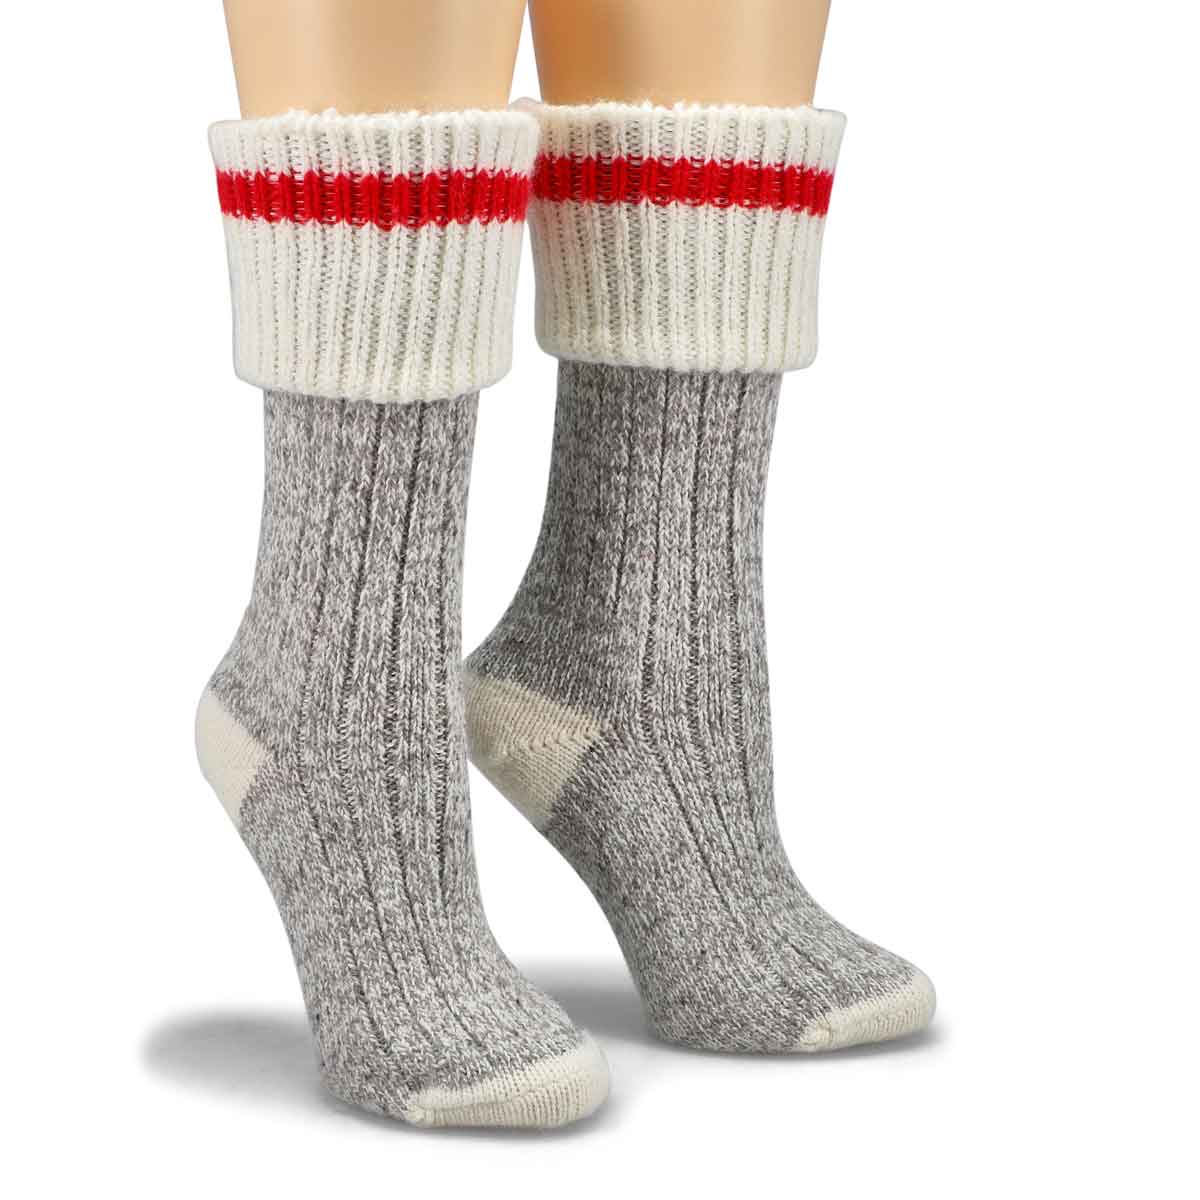 12 Pieces Women Wool Blend Ultra Soft Boot Sock Two Pair Pack